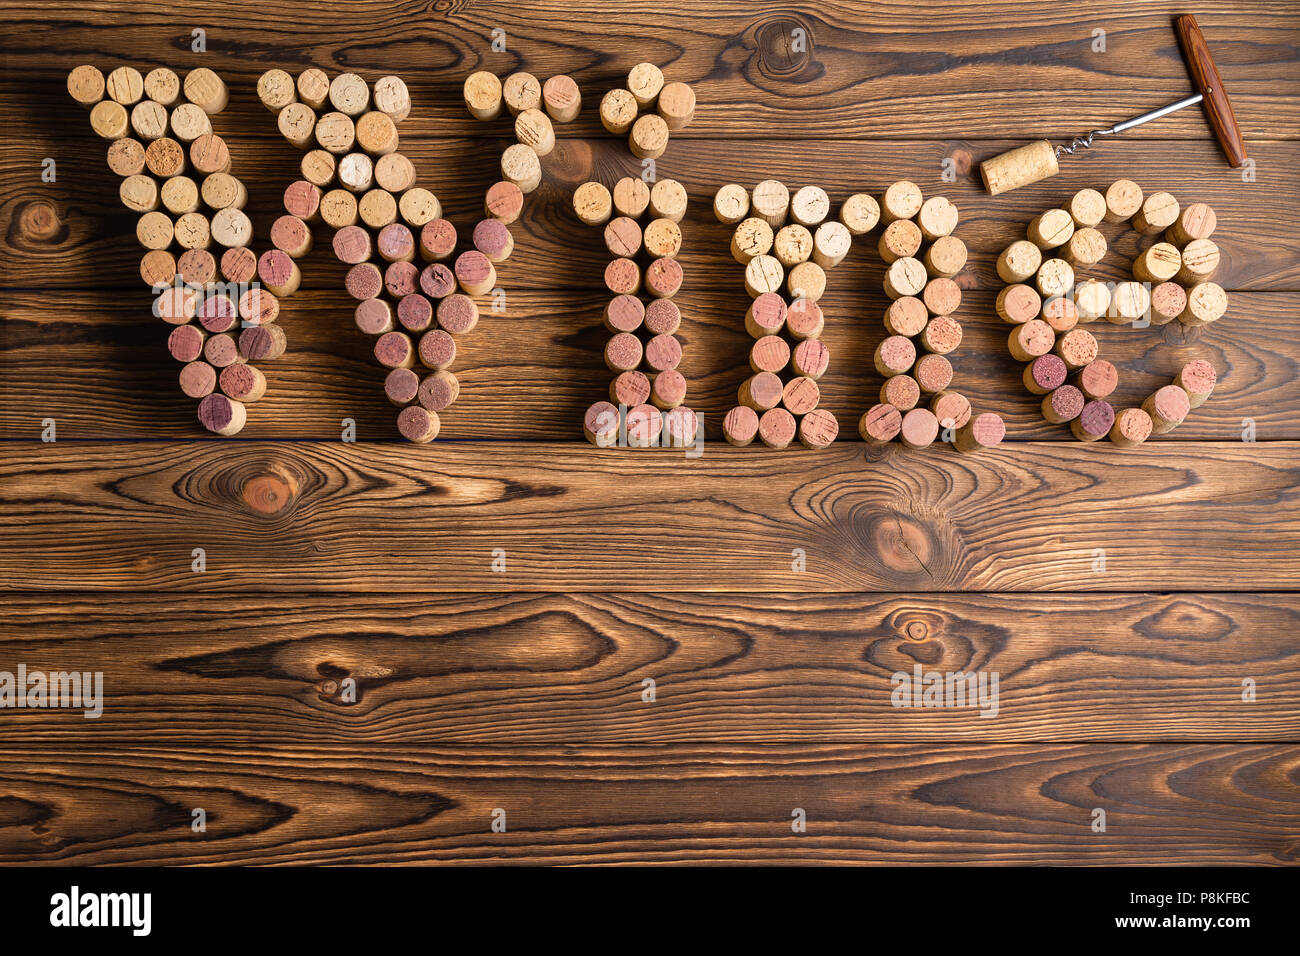 Word Wine formed of used red and white wine bottle corks in graduated colors on a rustic wooden background with an opener or corkscrew and copy space Stock Photo